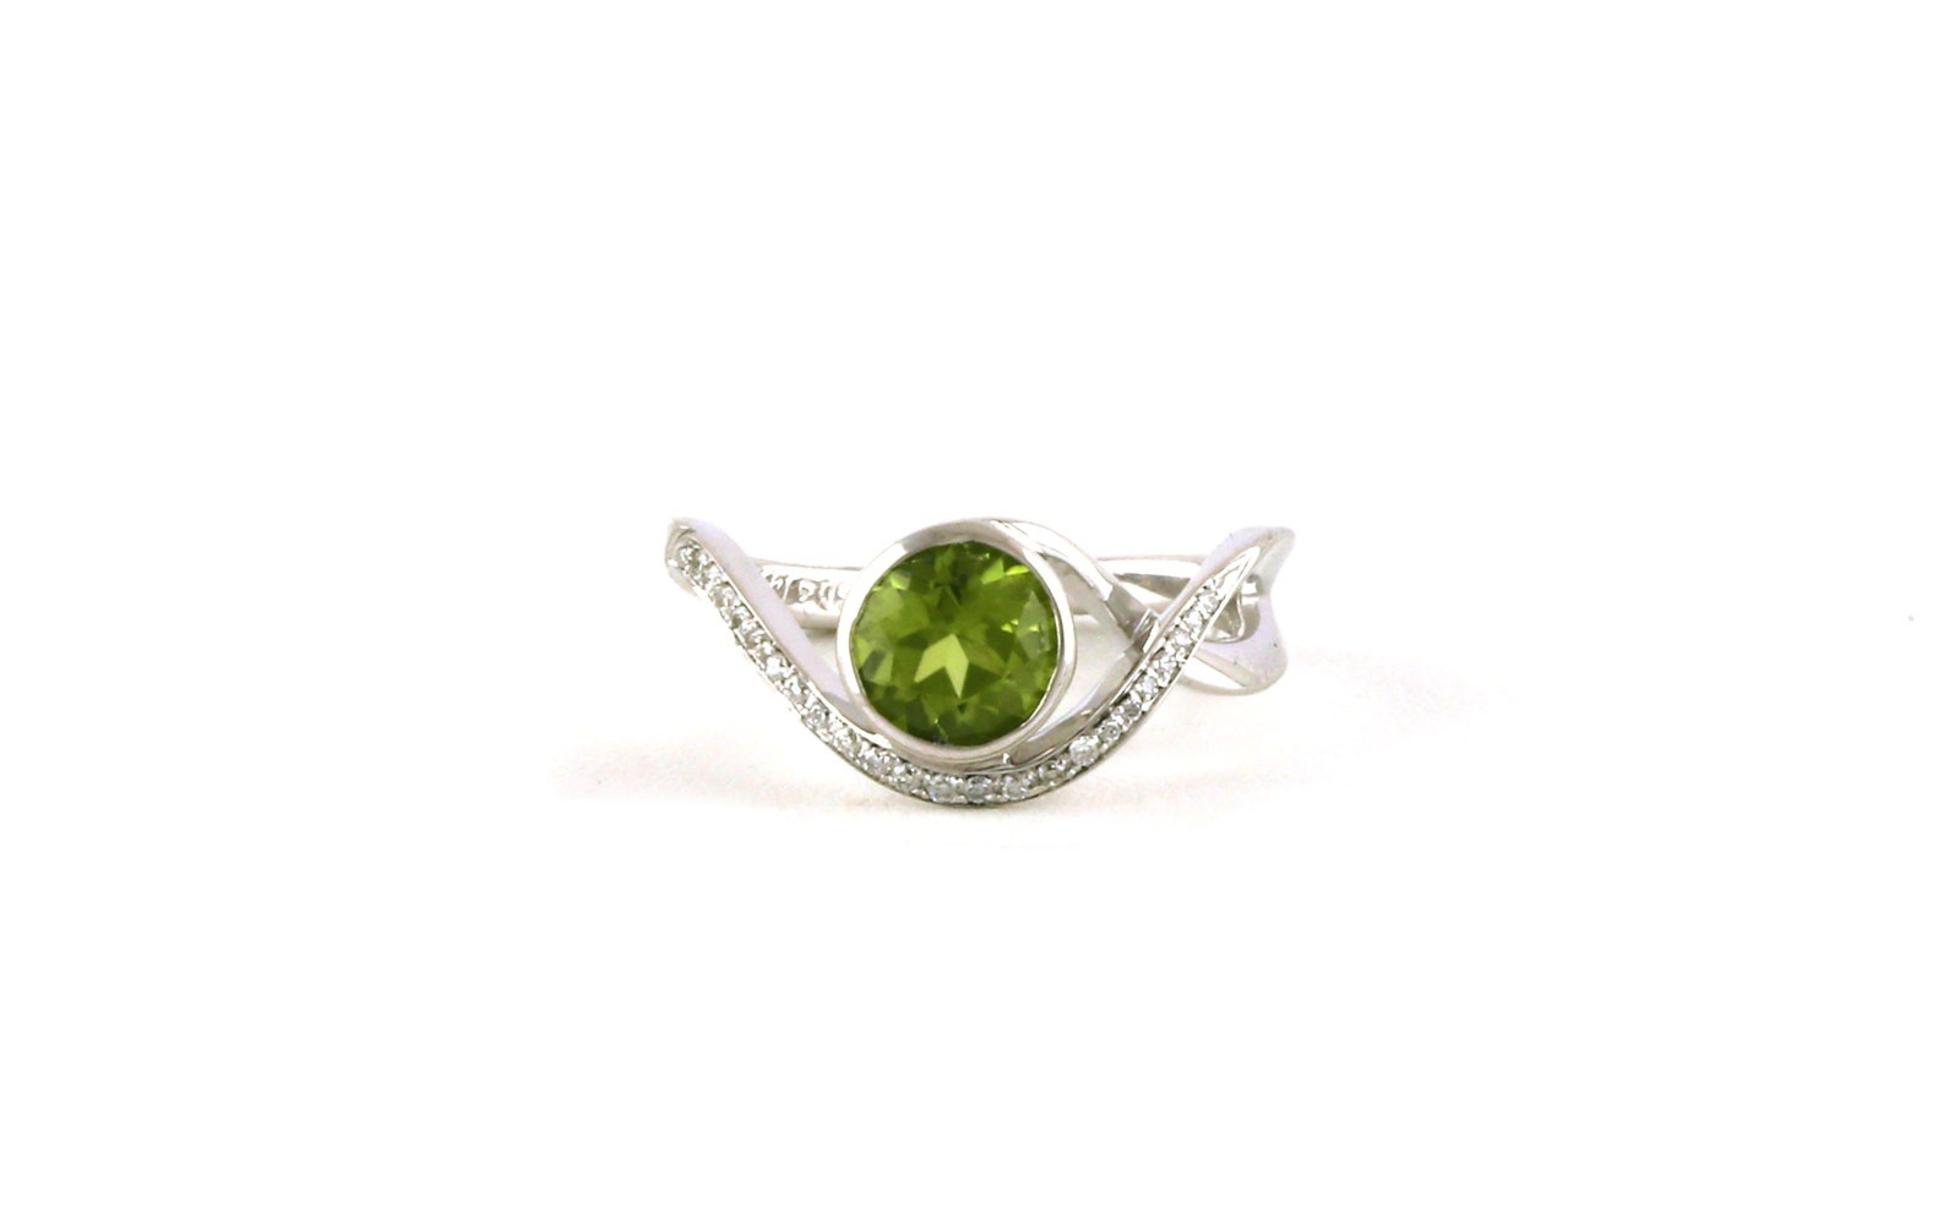 Aurora Design Bezel-set Peridot Oval and Diamond Ring in White Gold (1.35cts TWT)